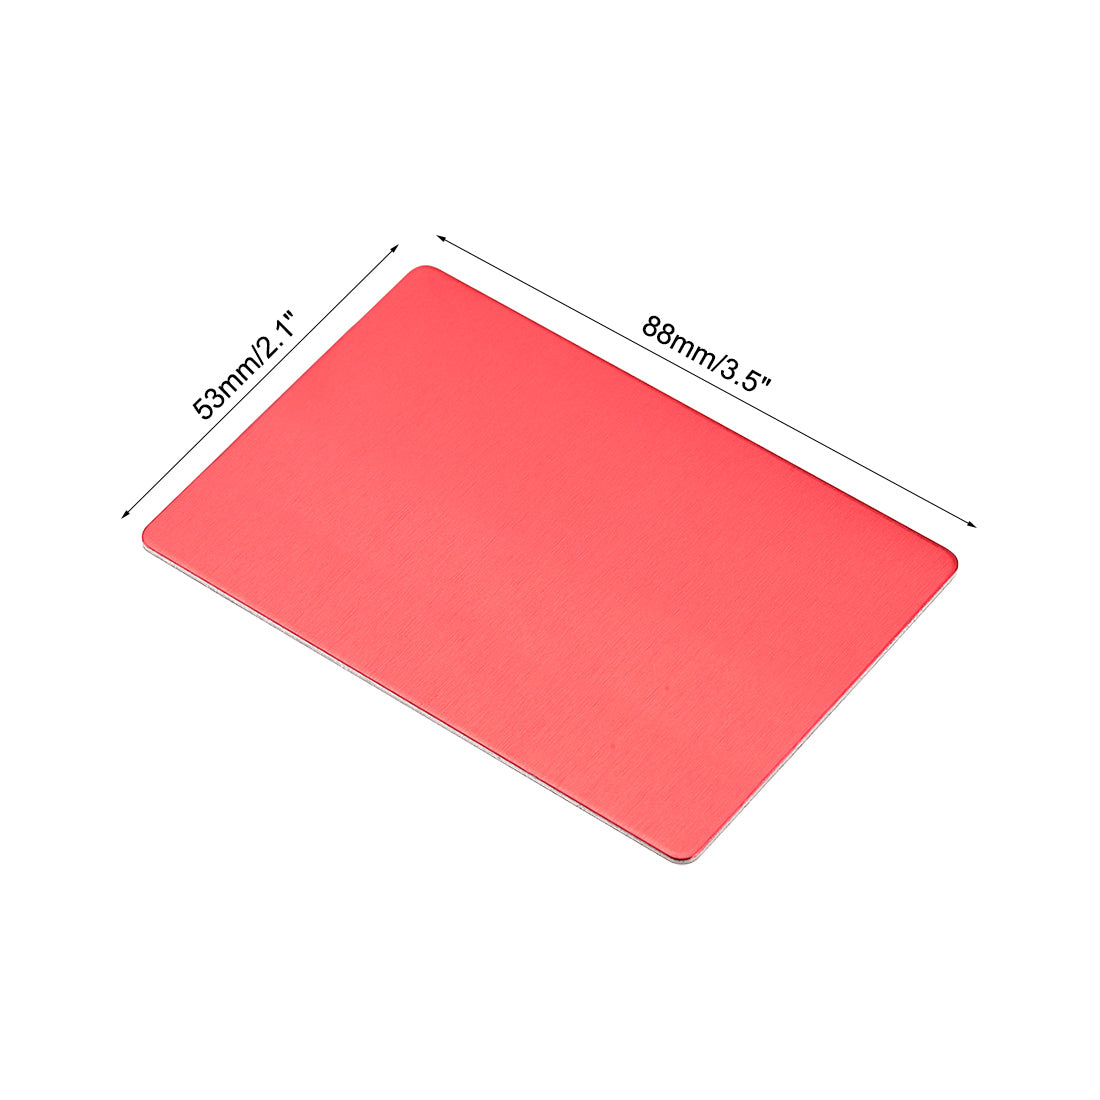 uxcell Uxcell Blank Metal Cards Anodized Aluminum Plate for DIY Laser Engraving